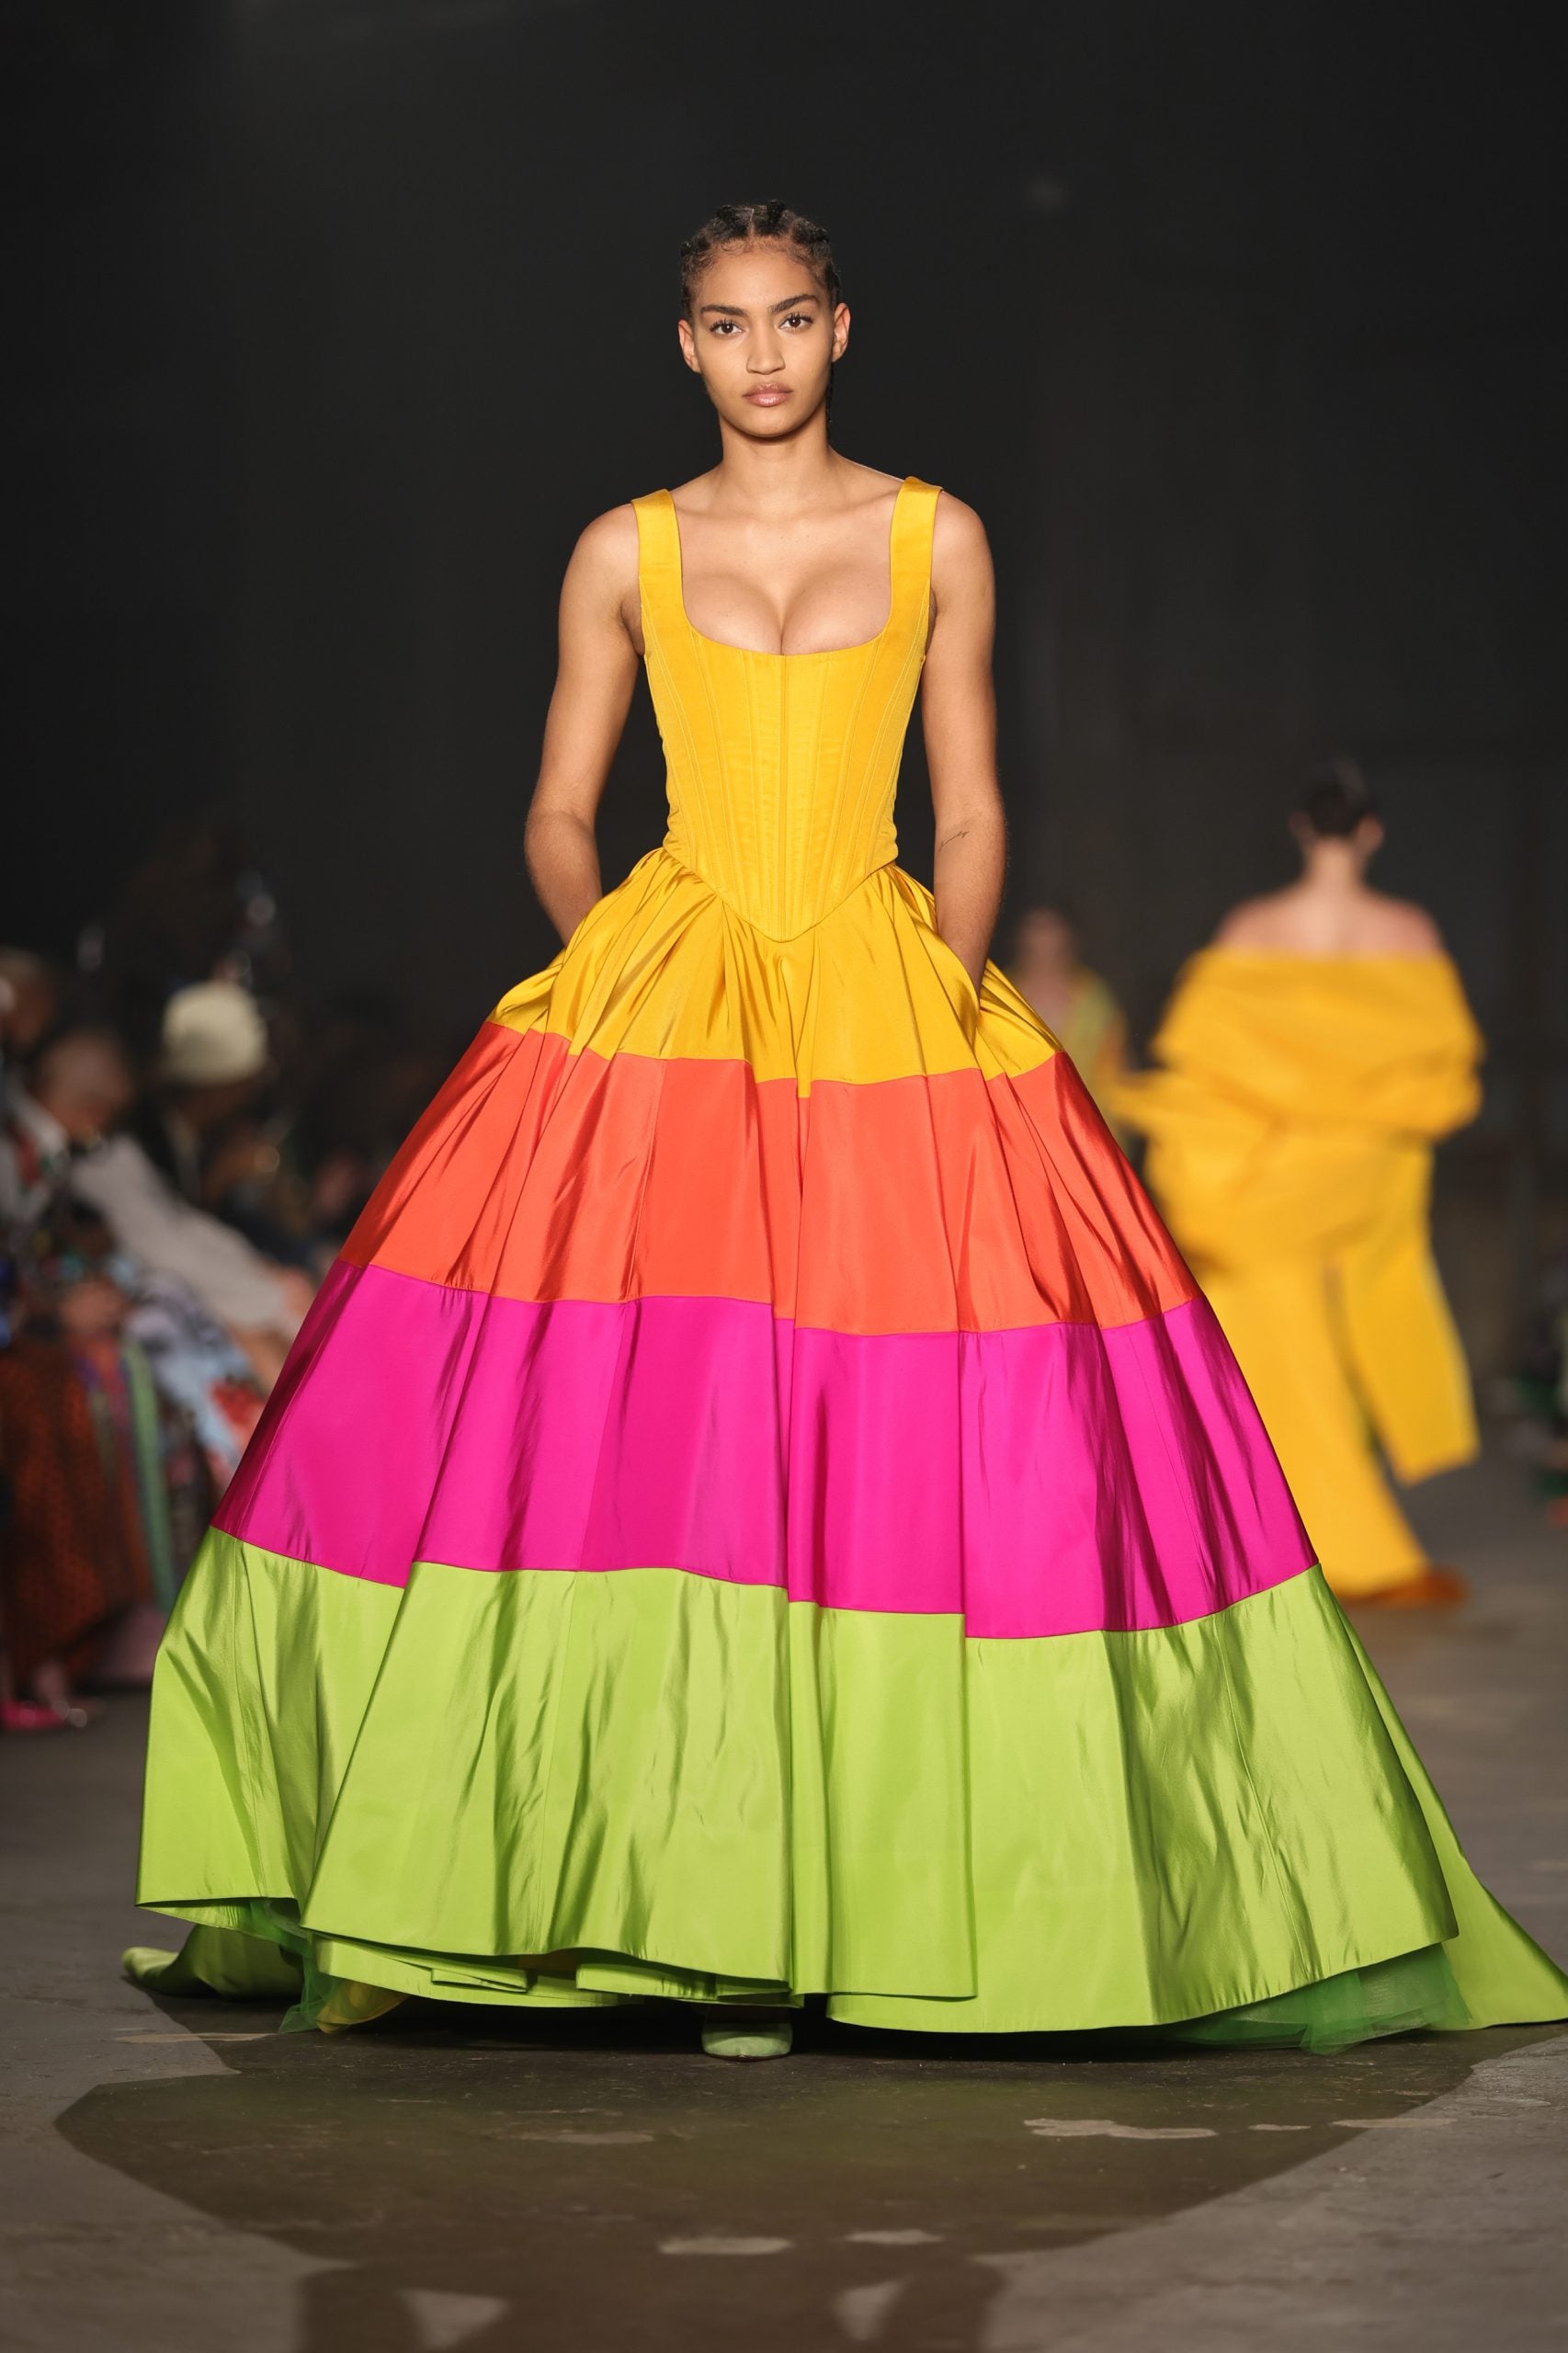 Let's Chat The Masterpiece That Was The Christopher John Rogers 2023 Resort Showcase